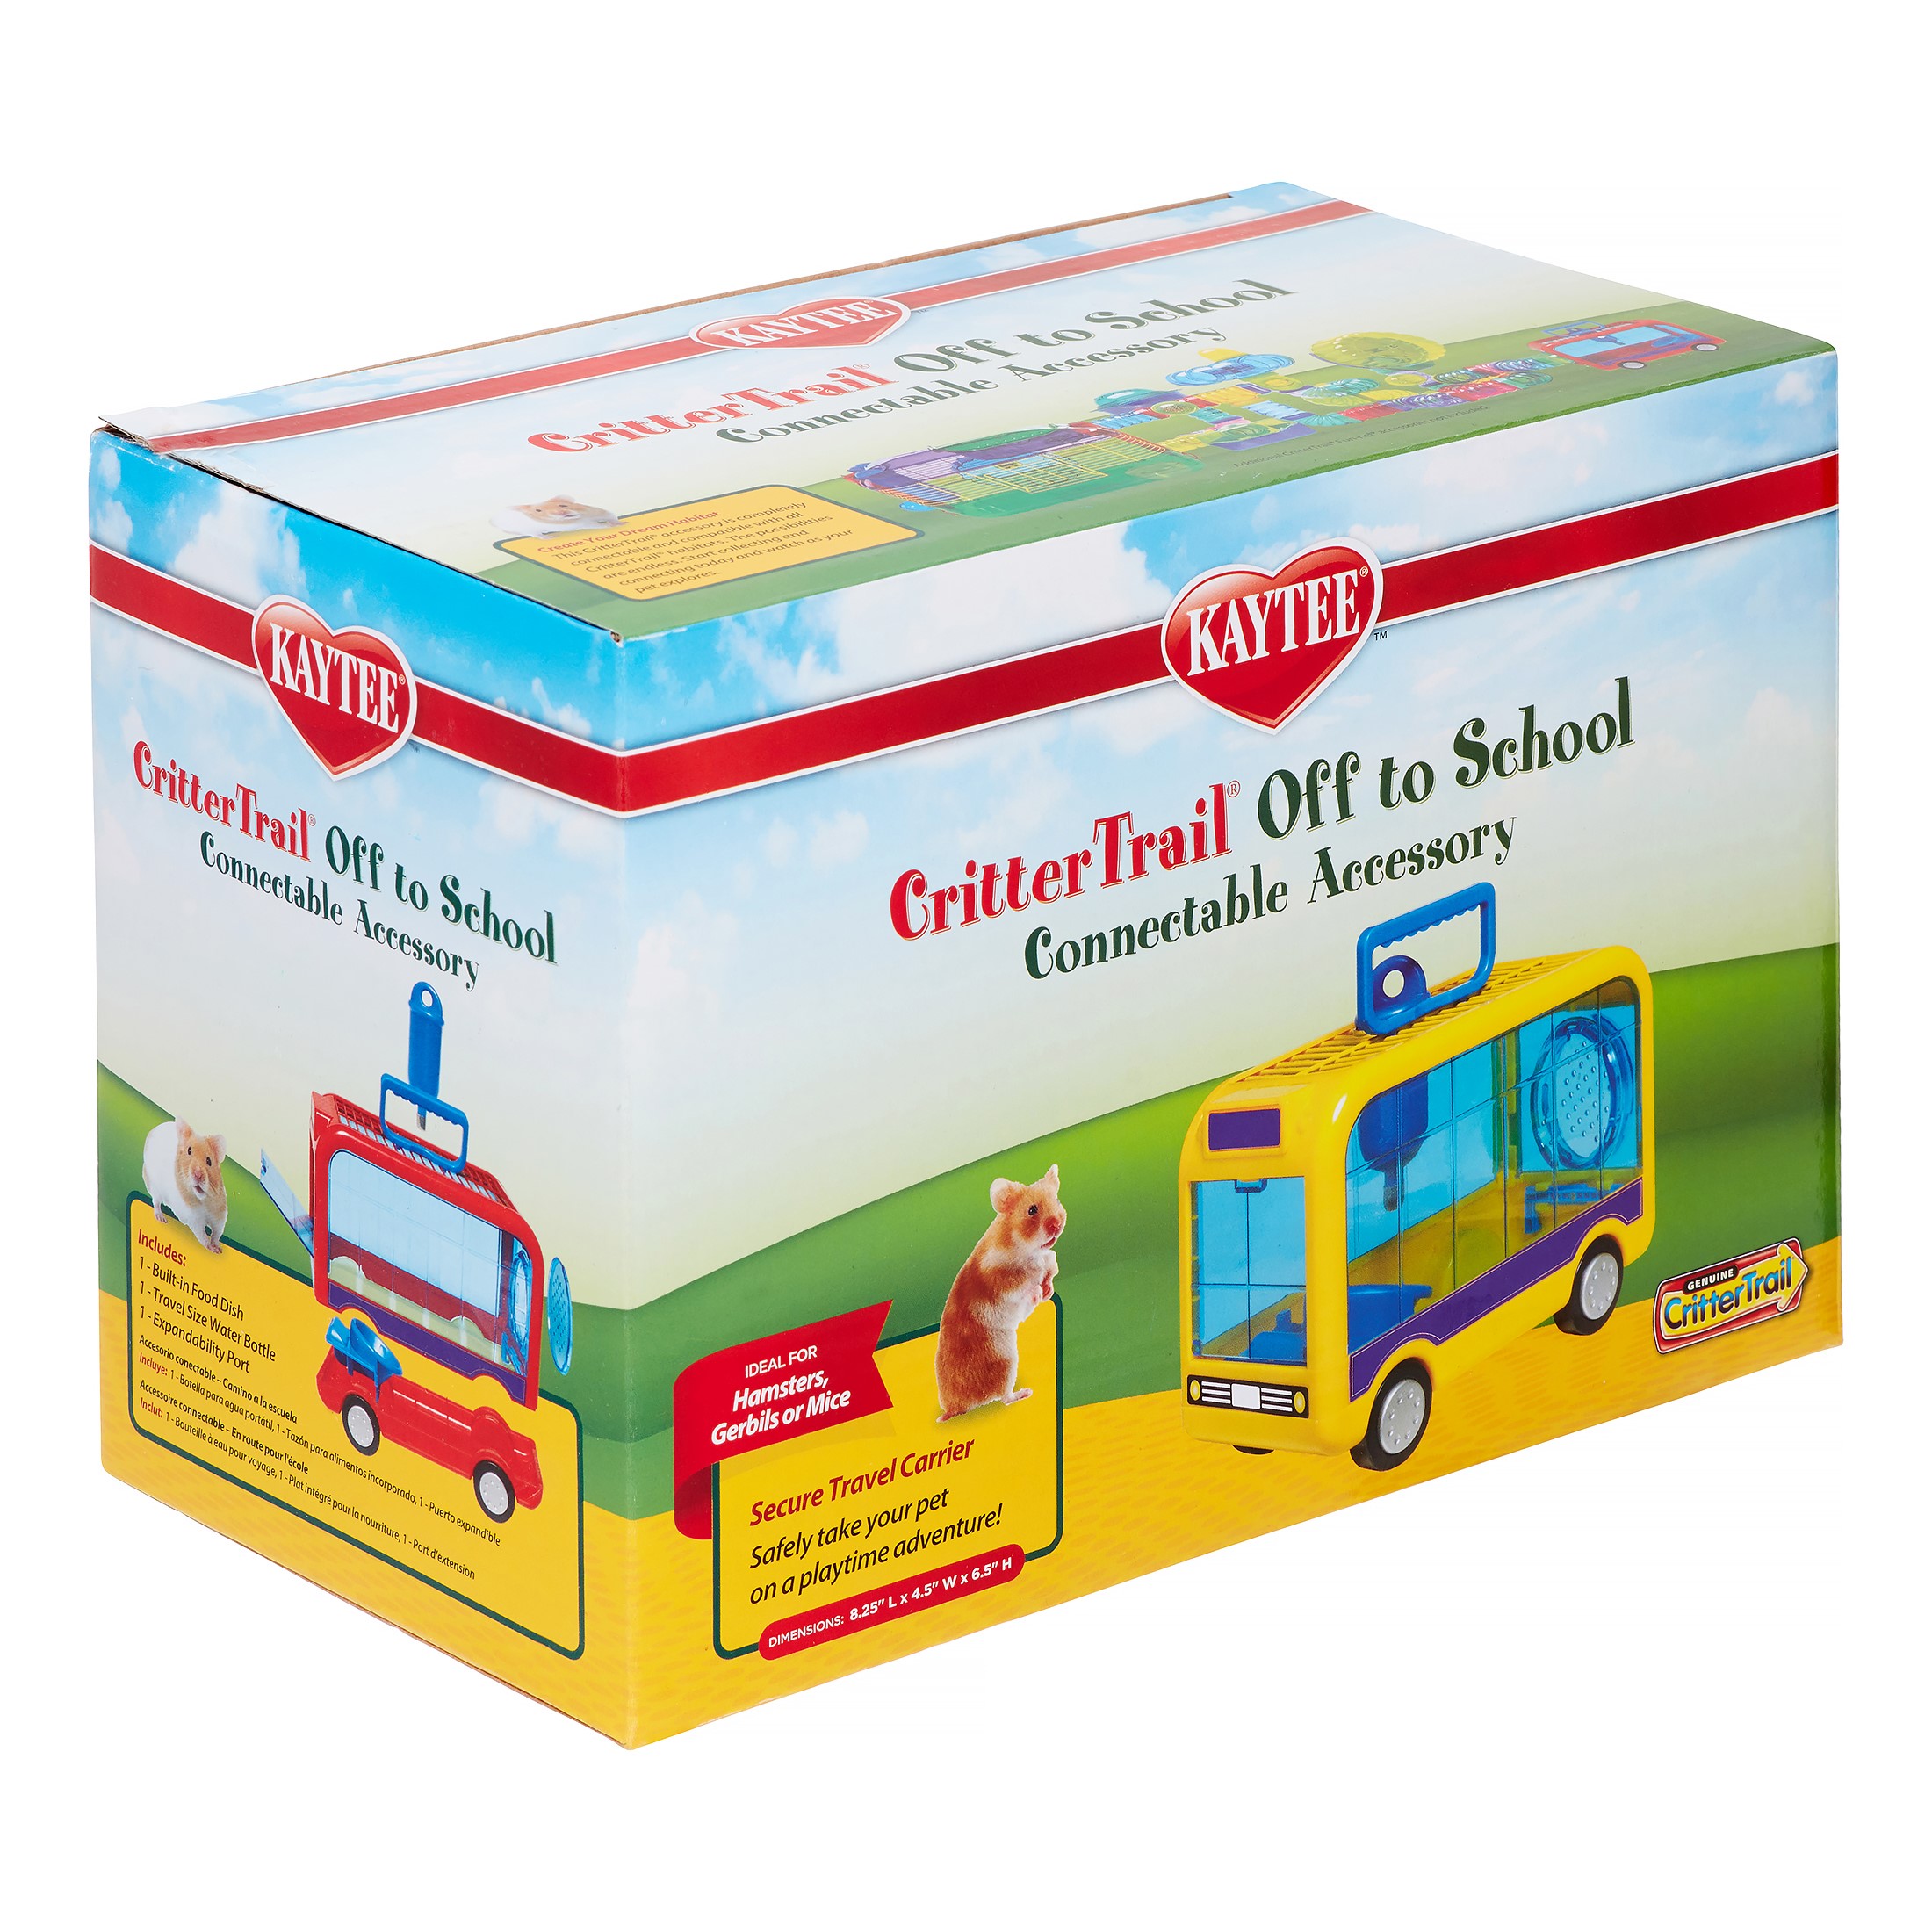 Kaytee CritterTrail Off to School Small Animal Habitat, Small, Assorted Colors - image 2 of 2